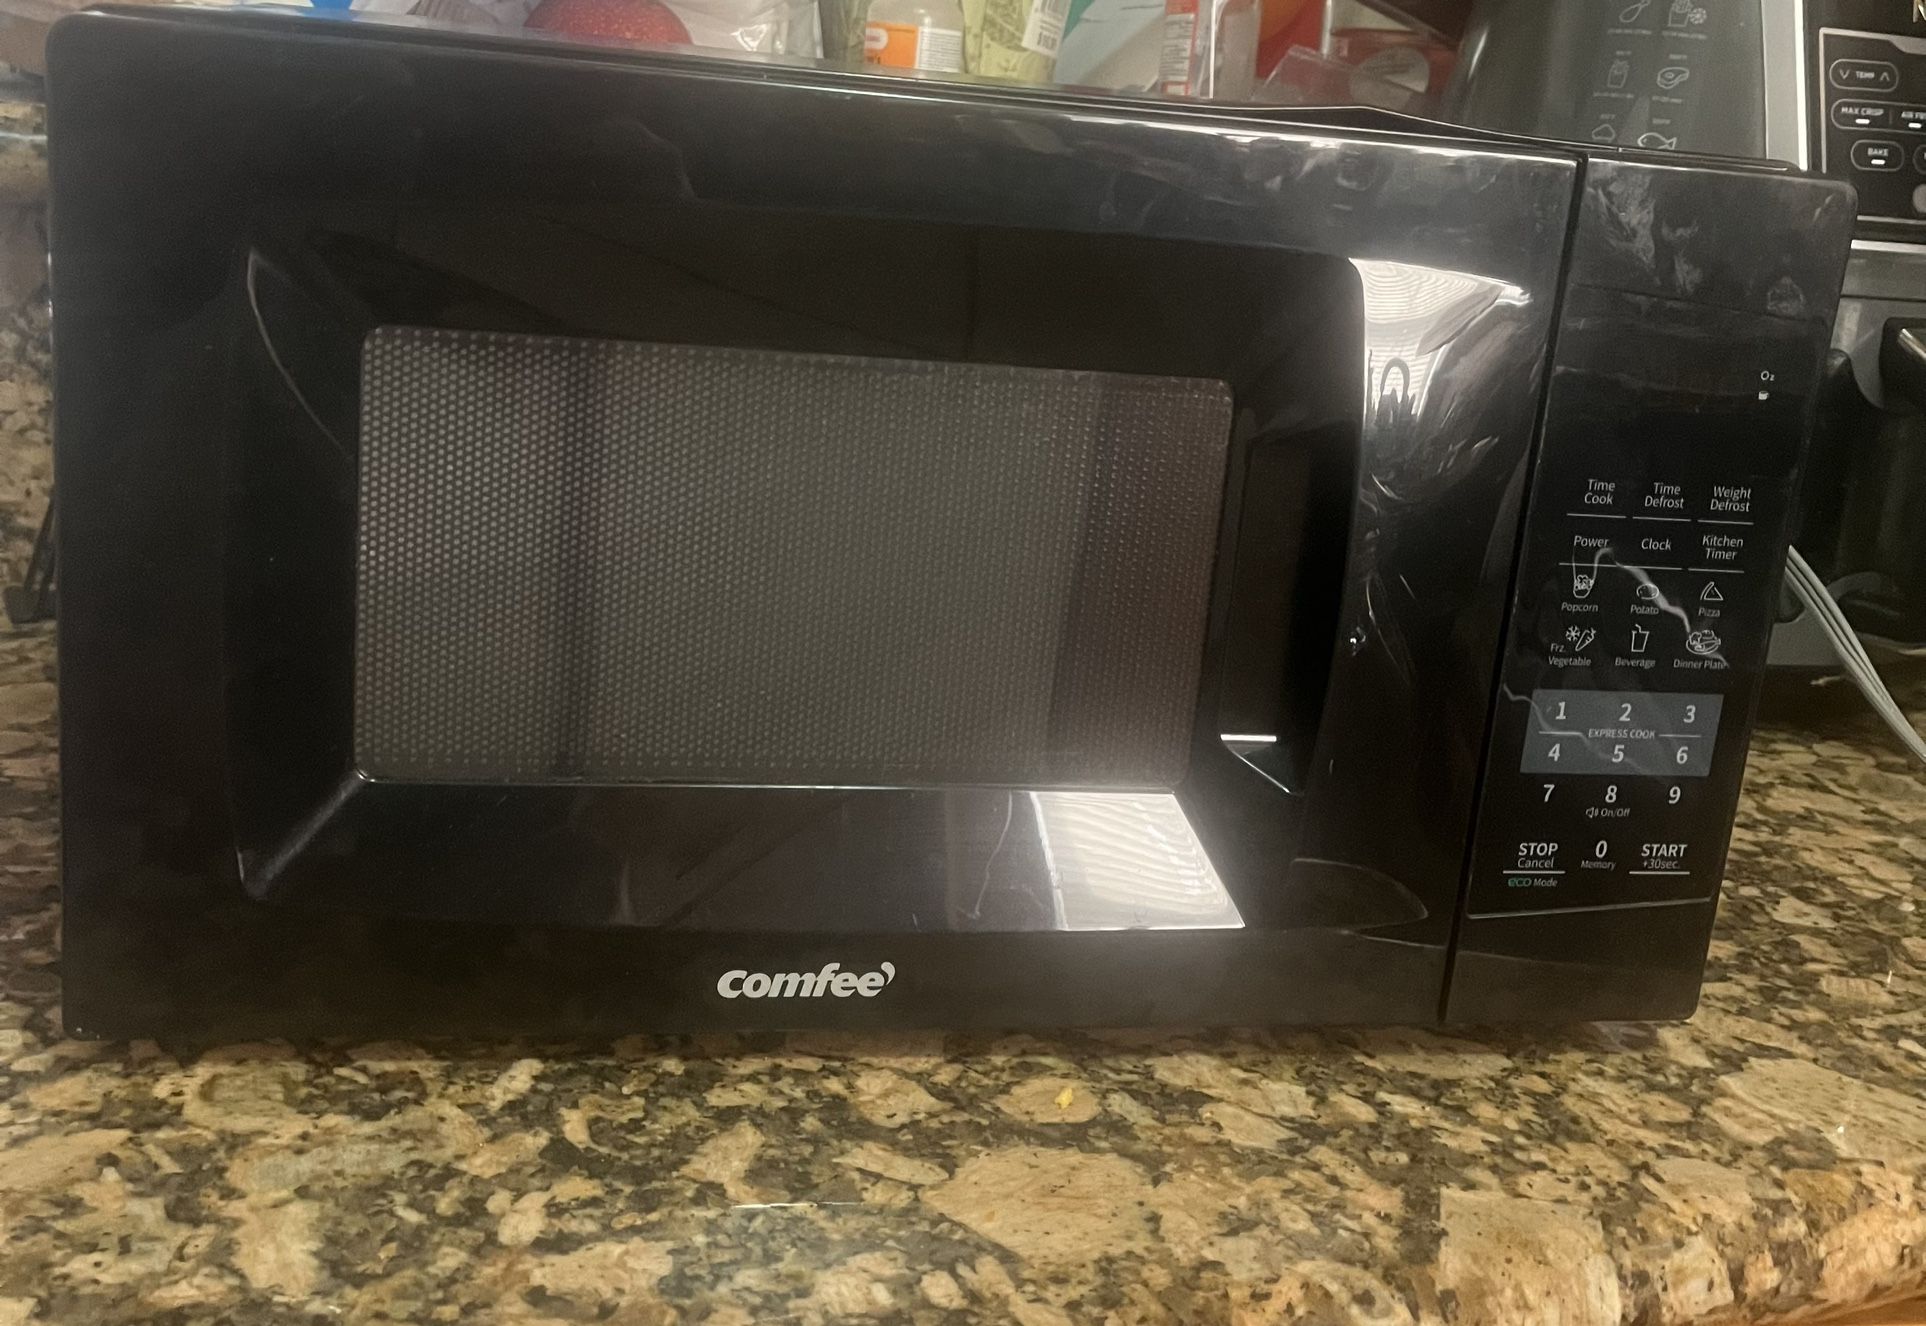 Small Microwave 